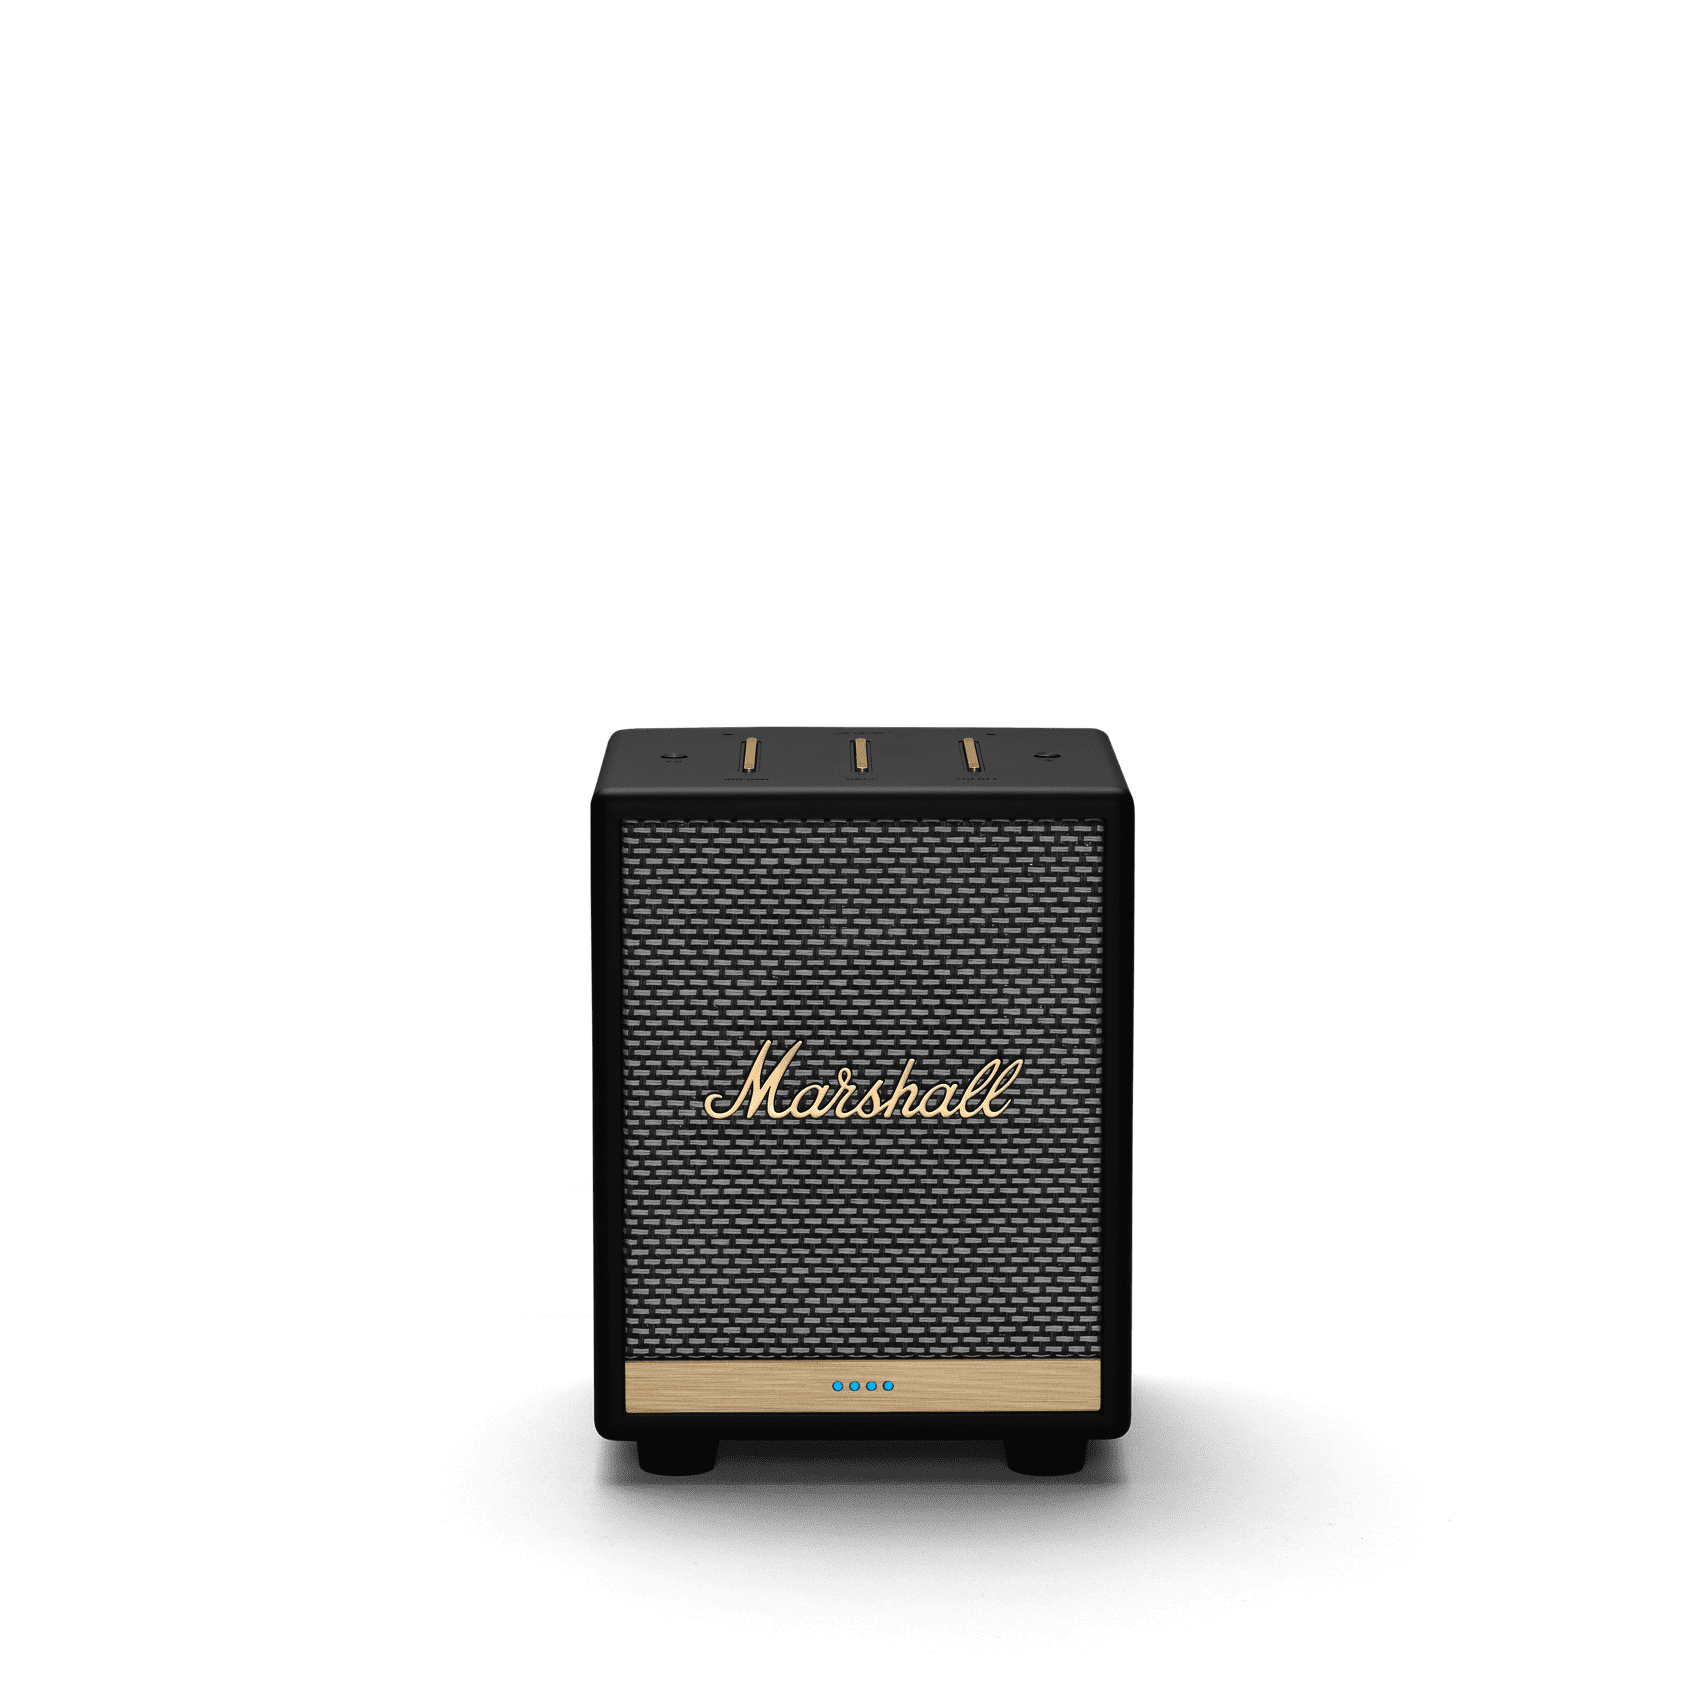 Buy Marshall Speakers and Home Audio systems